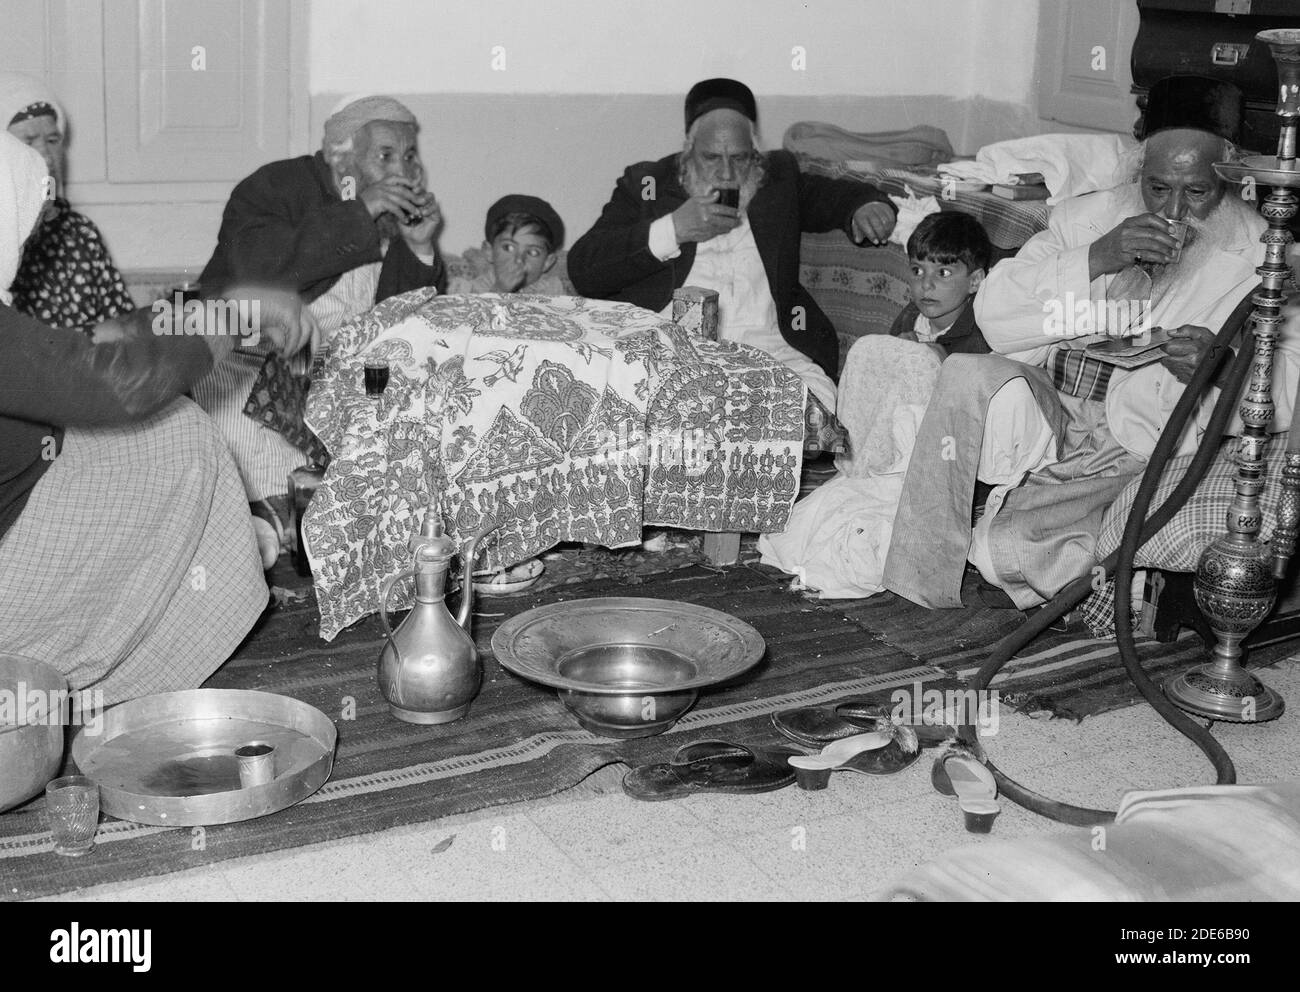 Yemenite Jews High Resolution Stock Photography and Images - Alamy